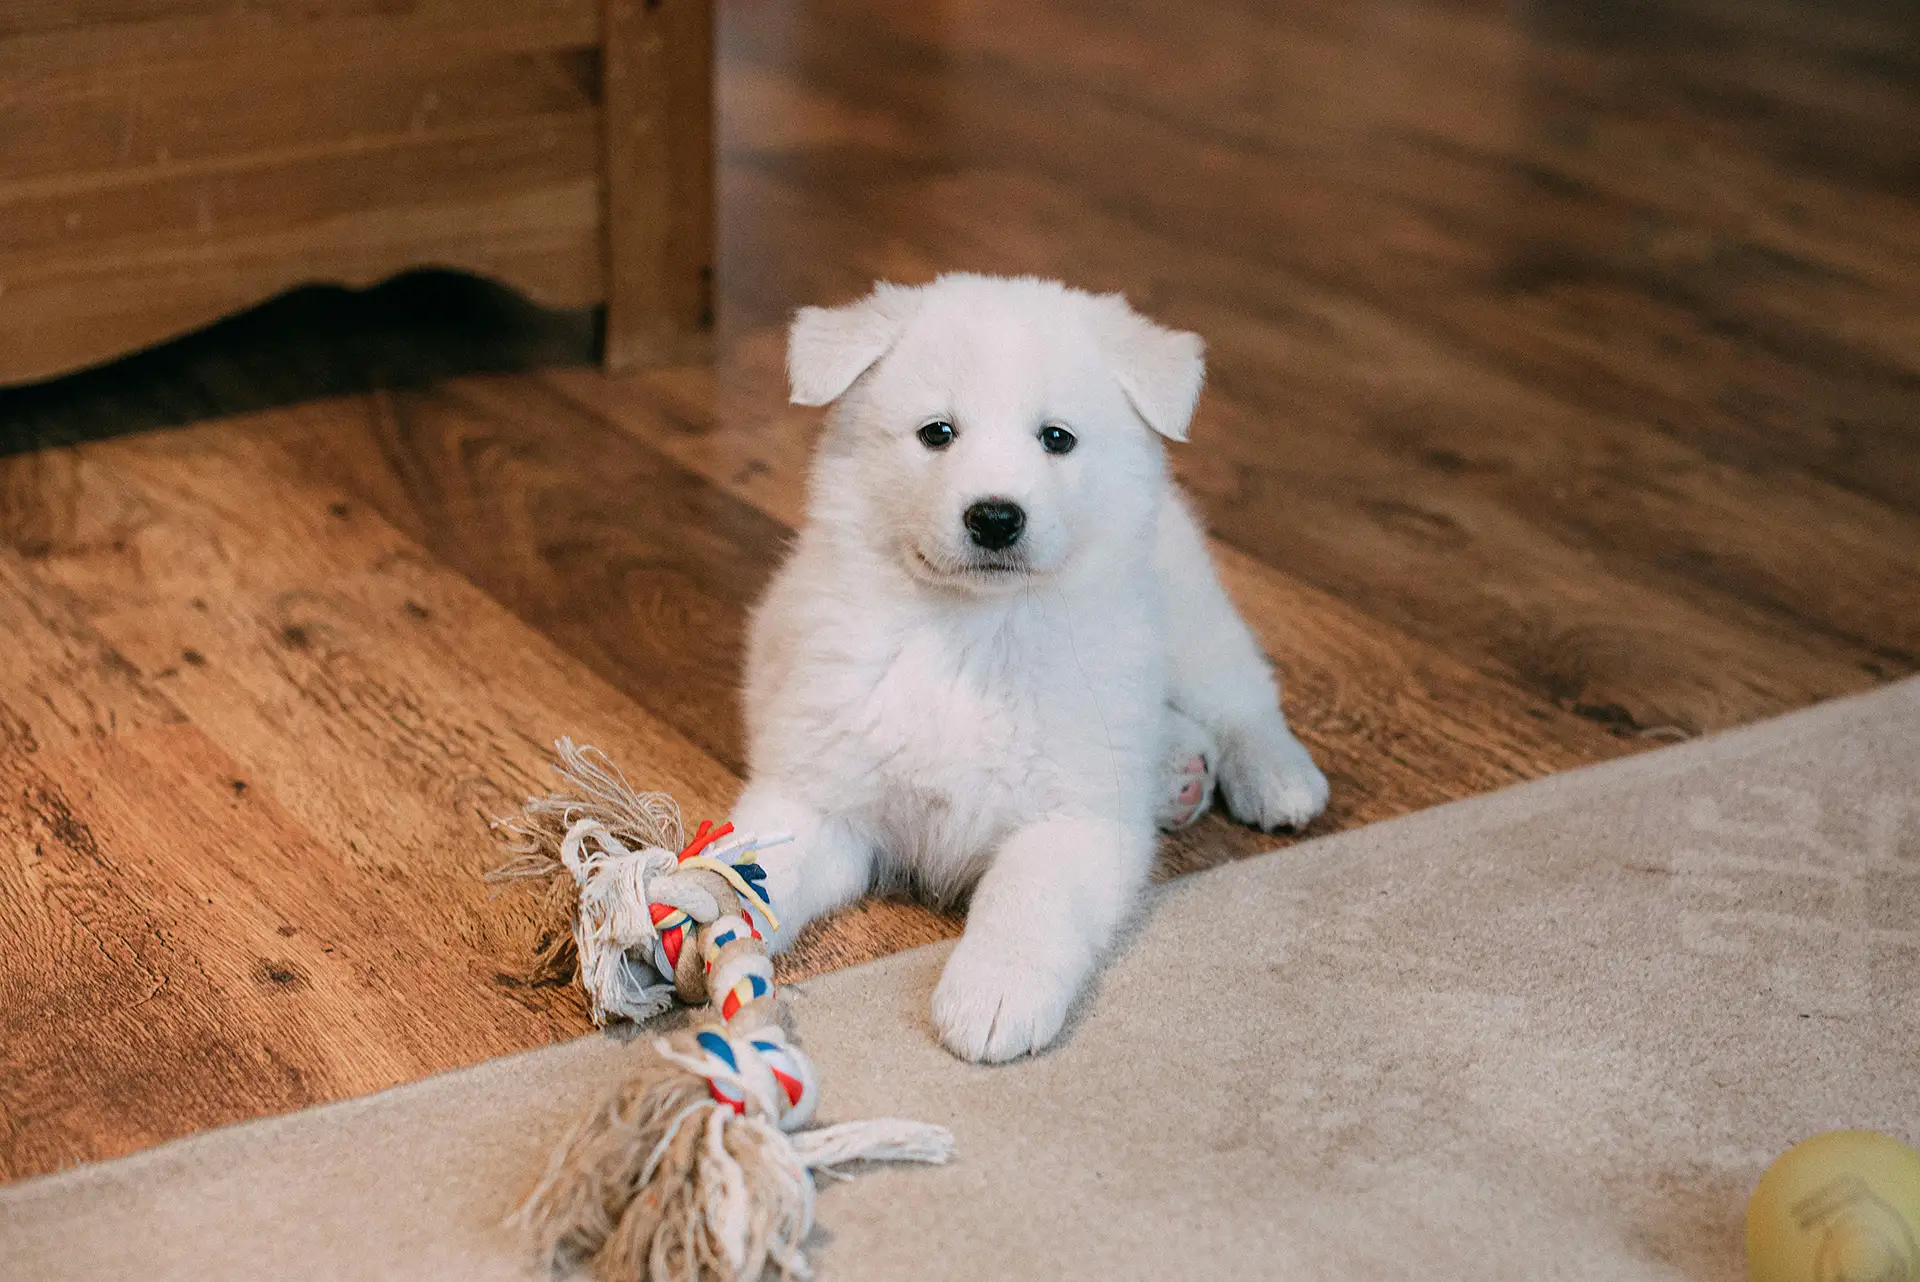 Small fluffy white dog sitting on floor with a toy.